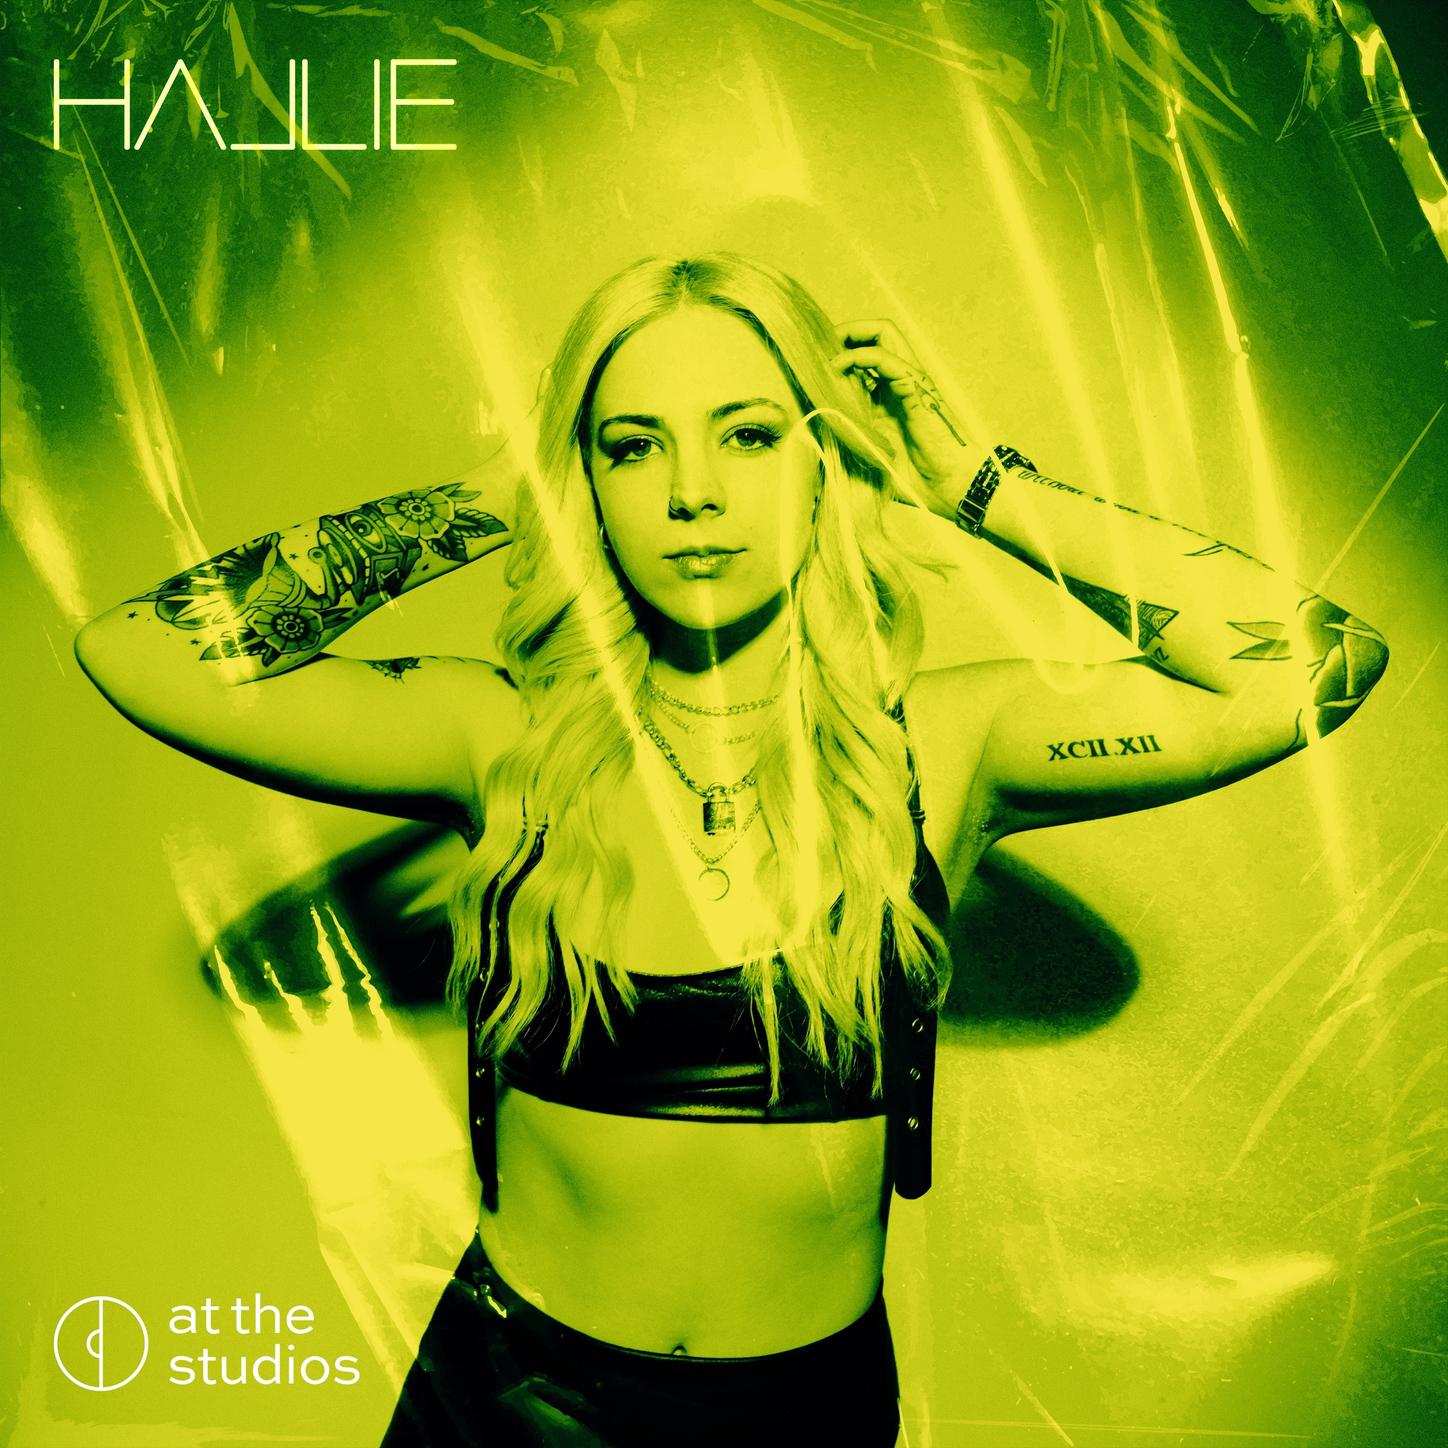 Hallie - Born For This